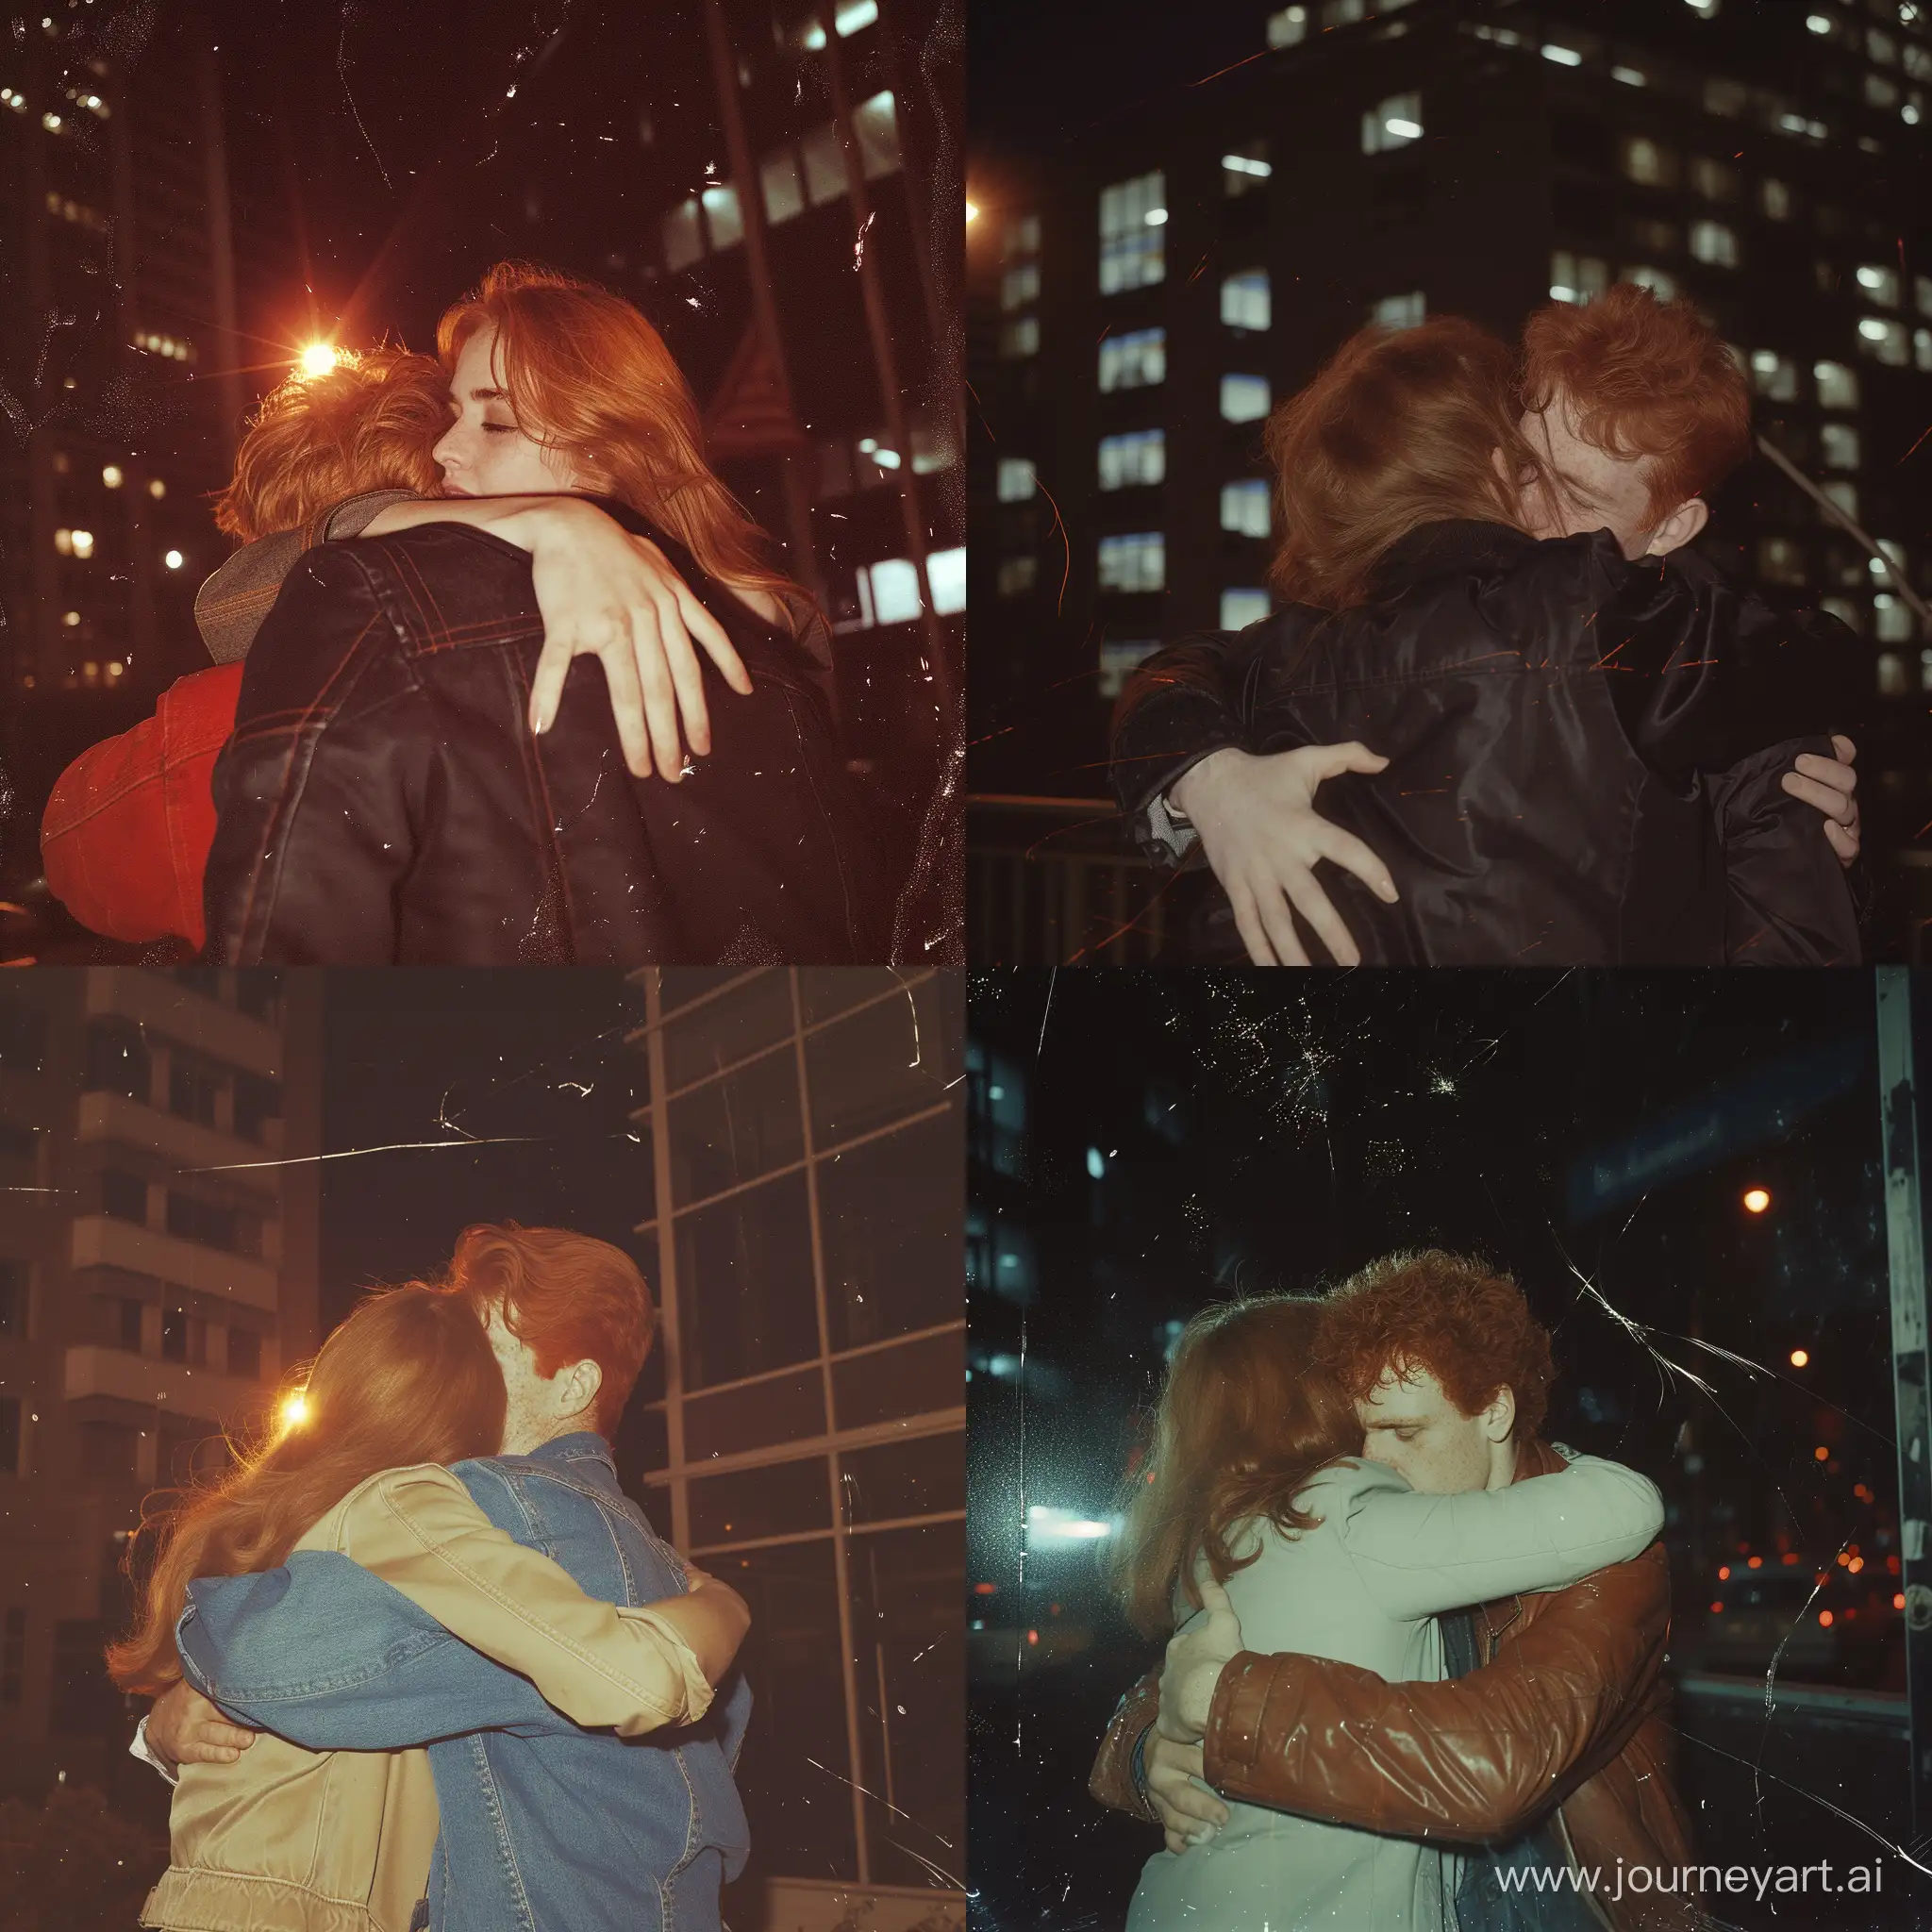 ultra-realitic photo, 16mm, grainy, night building urban scene, redhead man and biege-girl, shot from the back. she's hugging him. broken camera angle. artifacts. old photo from 1990s. drammatic flash. everything else is super dark almost invisible. ultra-realistic shot.
